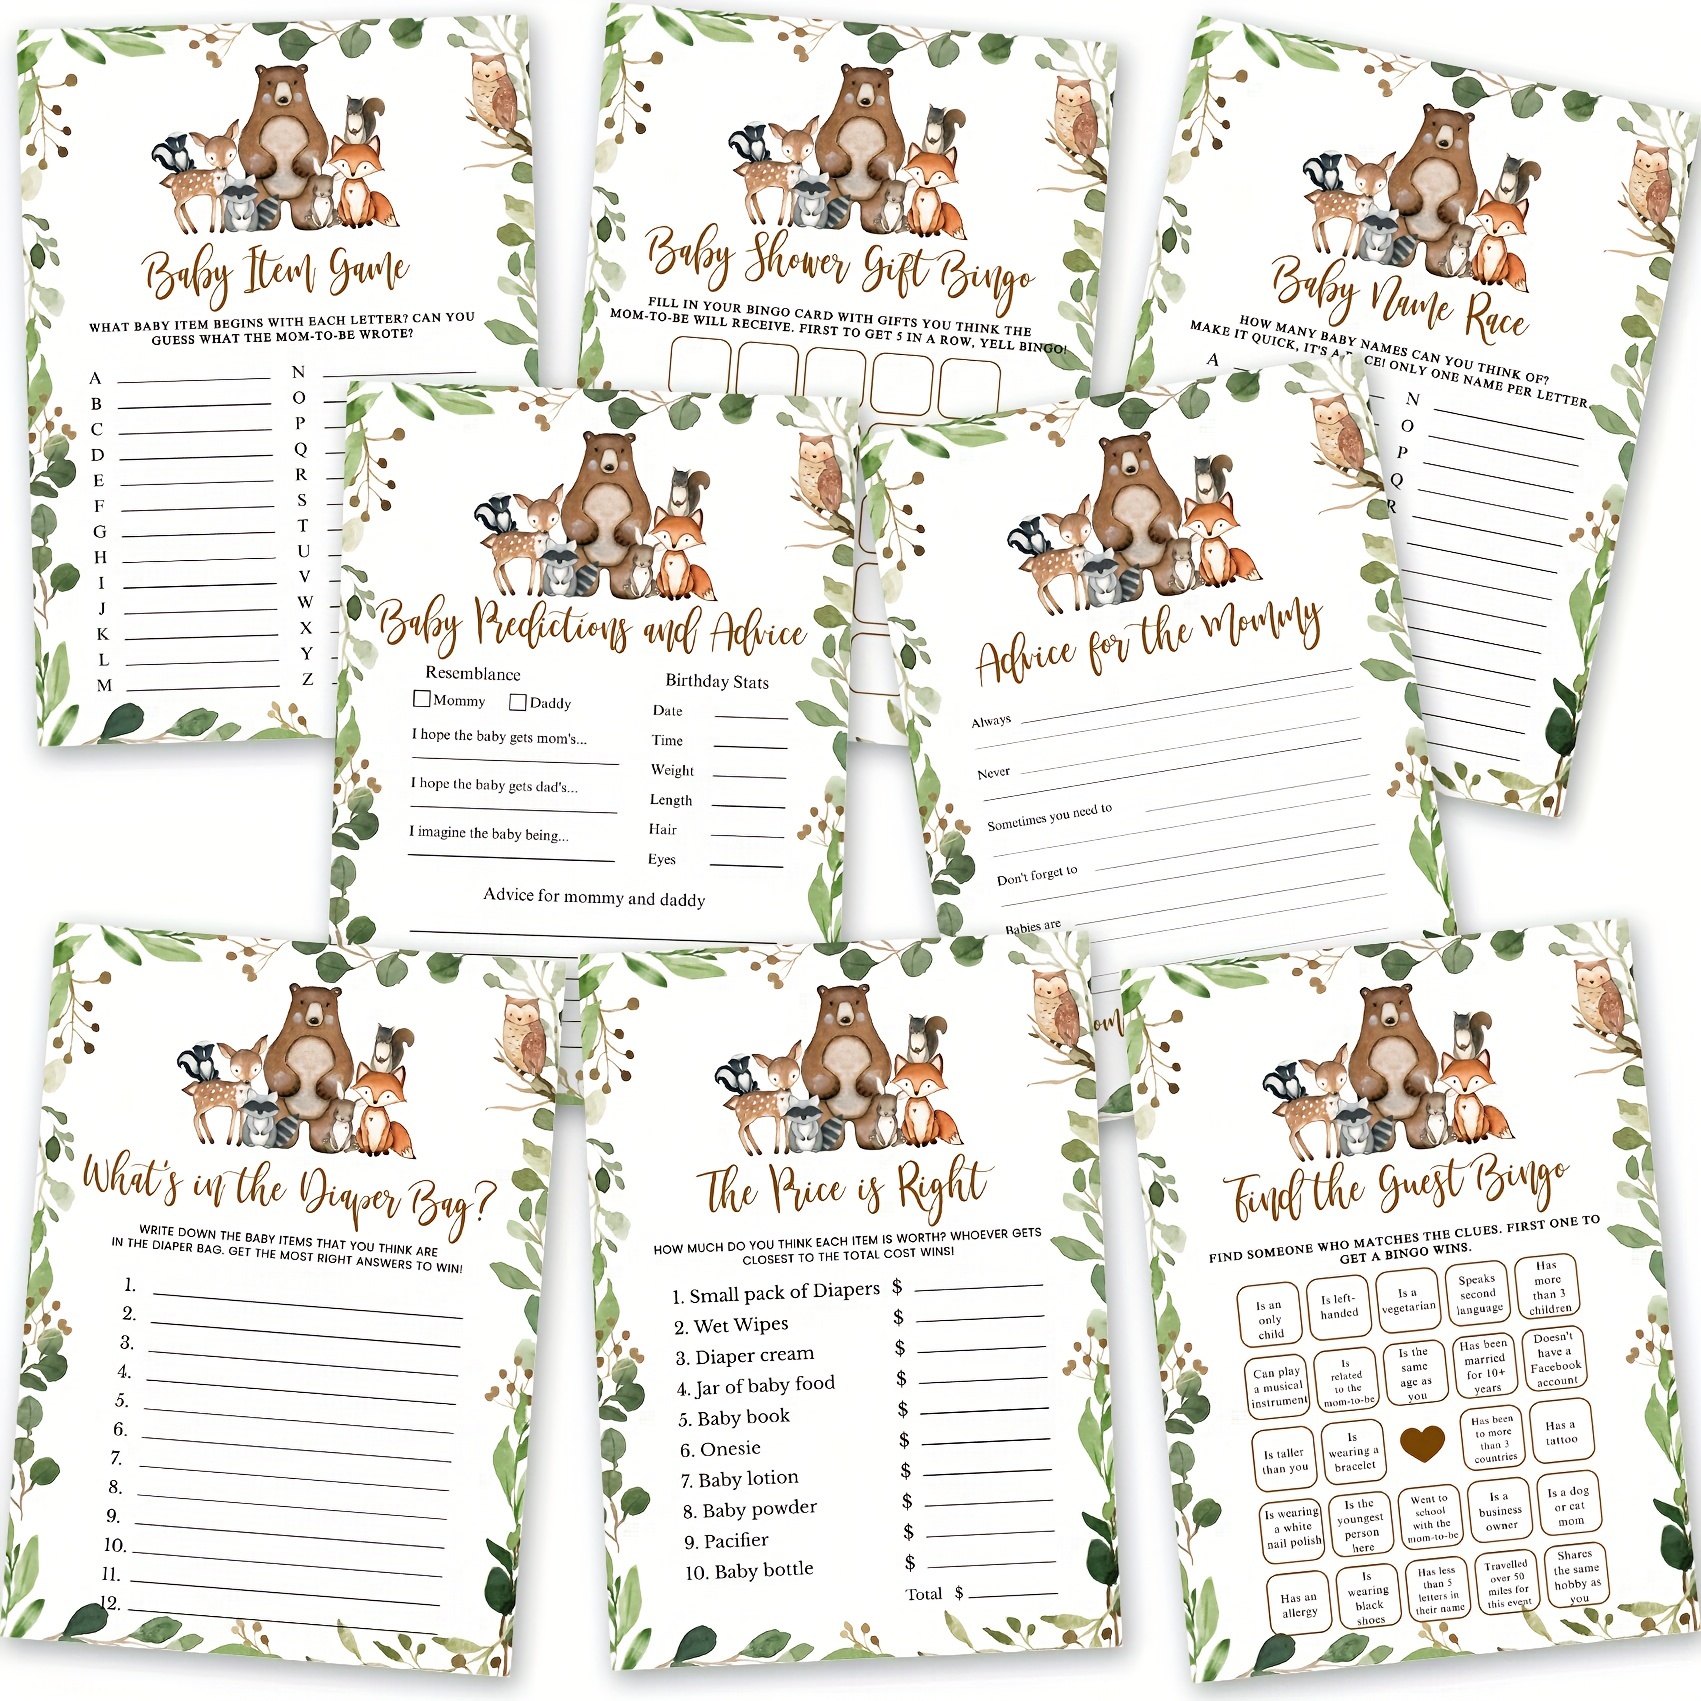 

40pcs Woodland Baby Games Gender Neutral - 8 Games Double Sided, Including Baby Item Game,baby Shower Gift Bingo,baby Name Race,baby Predictions And Advice,what's In The Diaper Bag Etc Easter Gift